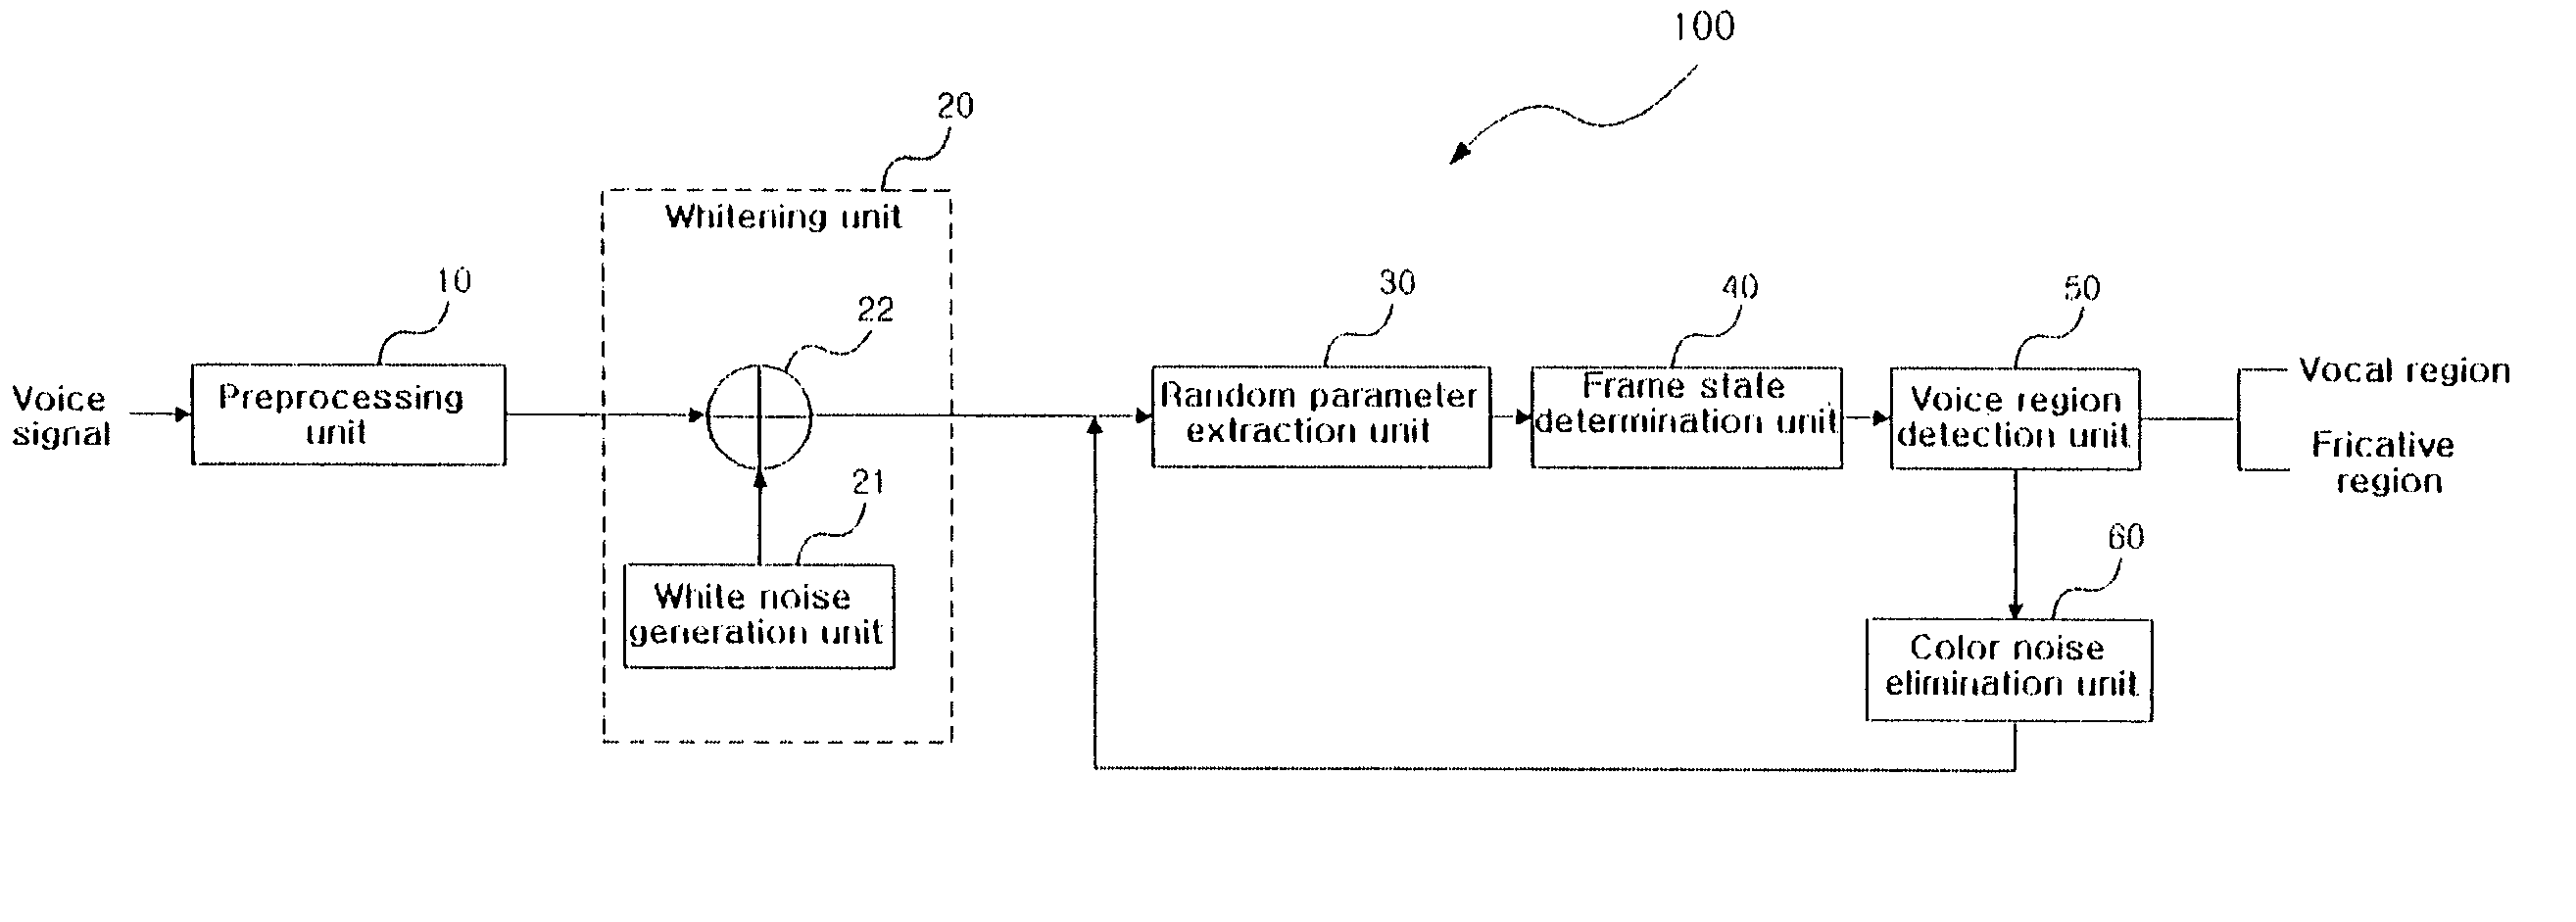 Voice region detection apparatus and method with color noise removal using run statistics